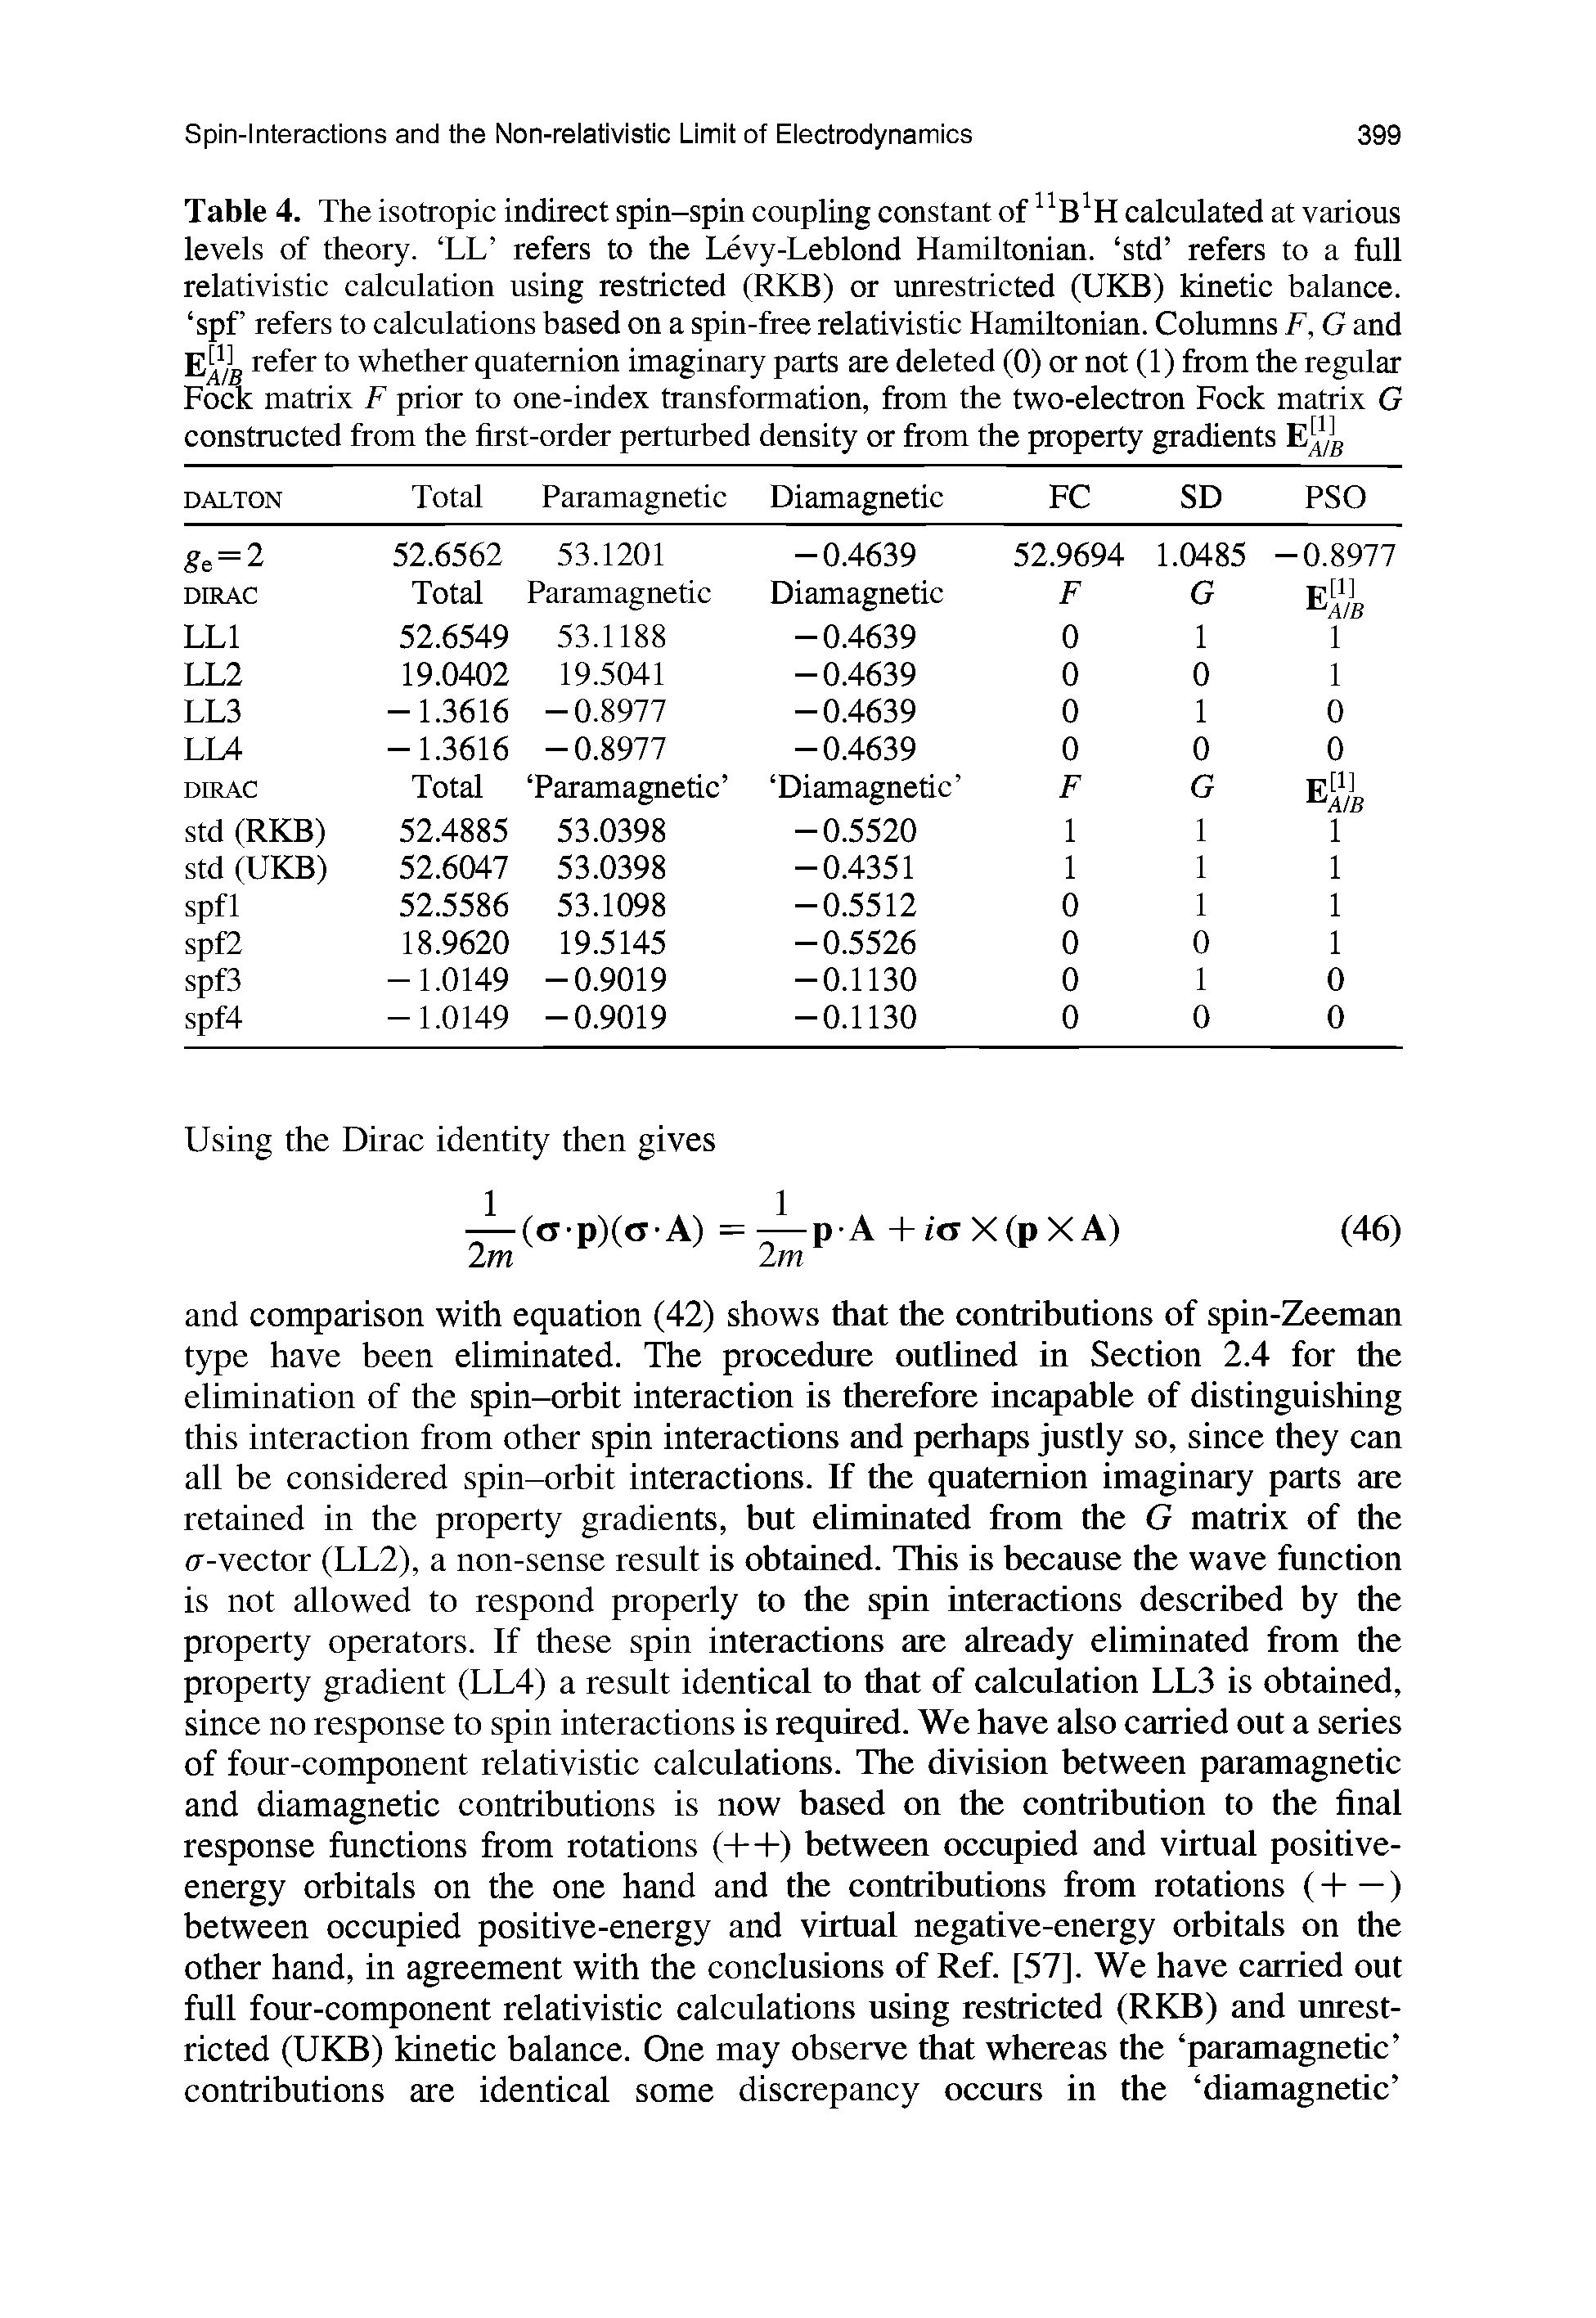 Table 4. The isotropic indirect spin-spin coupling constant of calculated at various levels of theory. LL refers to the Levy-Leblond Hamiltonian, std refers to a full relativistic calculation using restricted (RKB) or unrestricted (UKB) kinetic balance, spf refers to calculations based on a spin-free relativistic Hamiltonian. Columns F, G and whether quaternion imaginary parts are deleted (0) or not (1) from the regular Fock matrix F prior to one-index transformation, from the two-electron Fock matrix G...